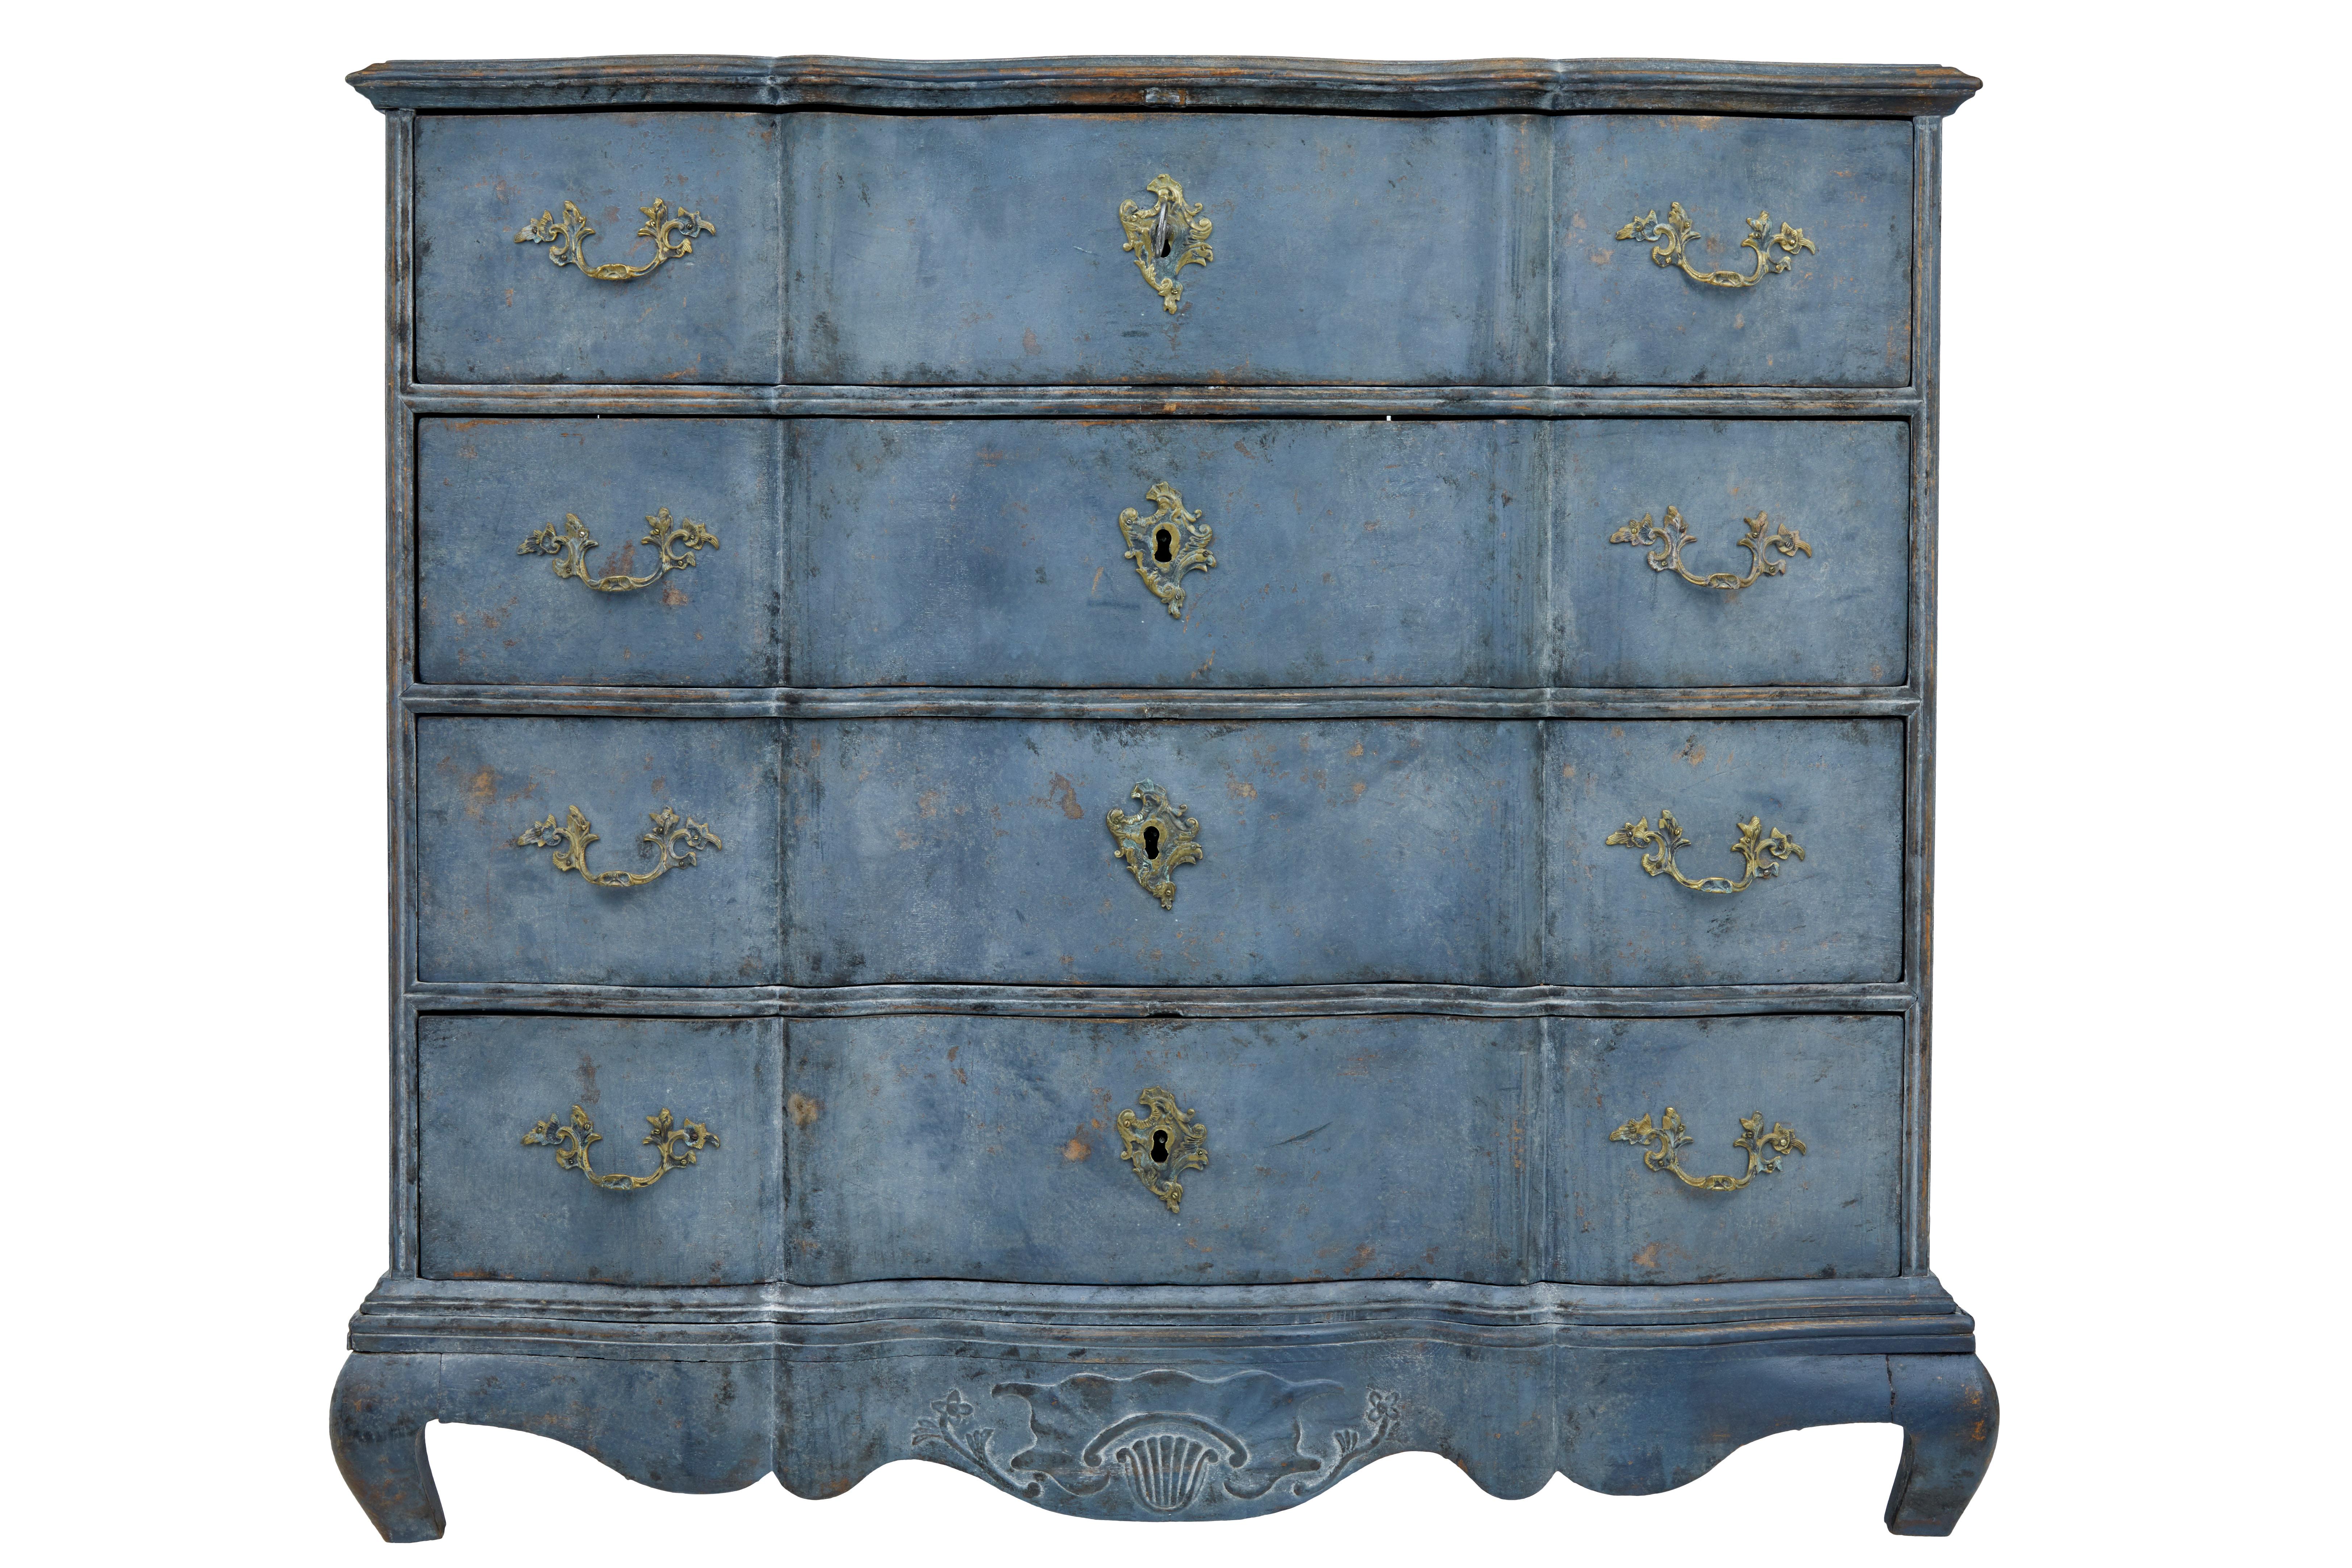 Beautiful mid-19th century chest of drawers, circa 1860.
Four-door oak chest, with shaped front and ornate brass hardware.
Iron carrying handles to the sides.
Carved shell patterned frieze.
Later paint, which is now faded with losses.
Heavy